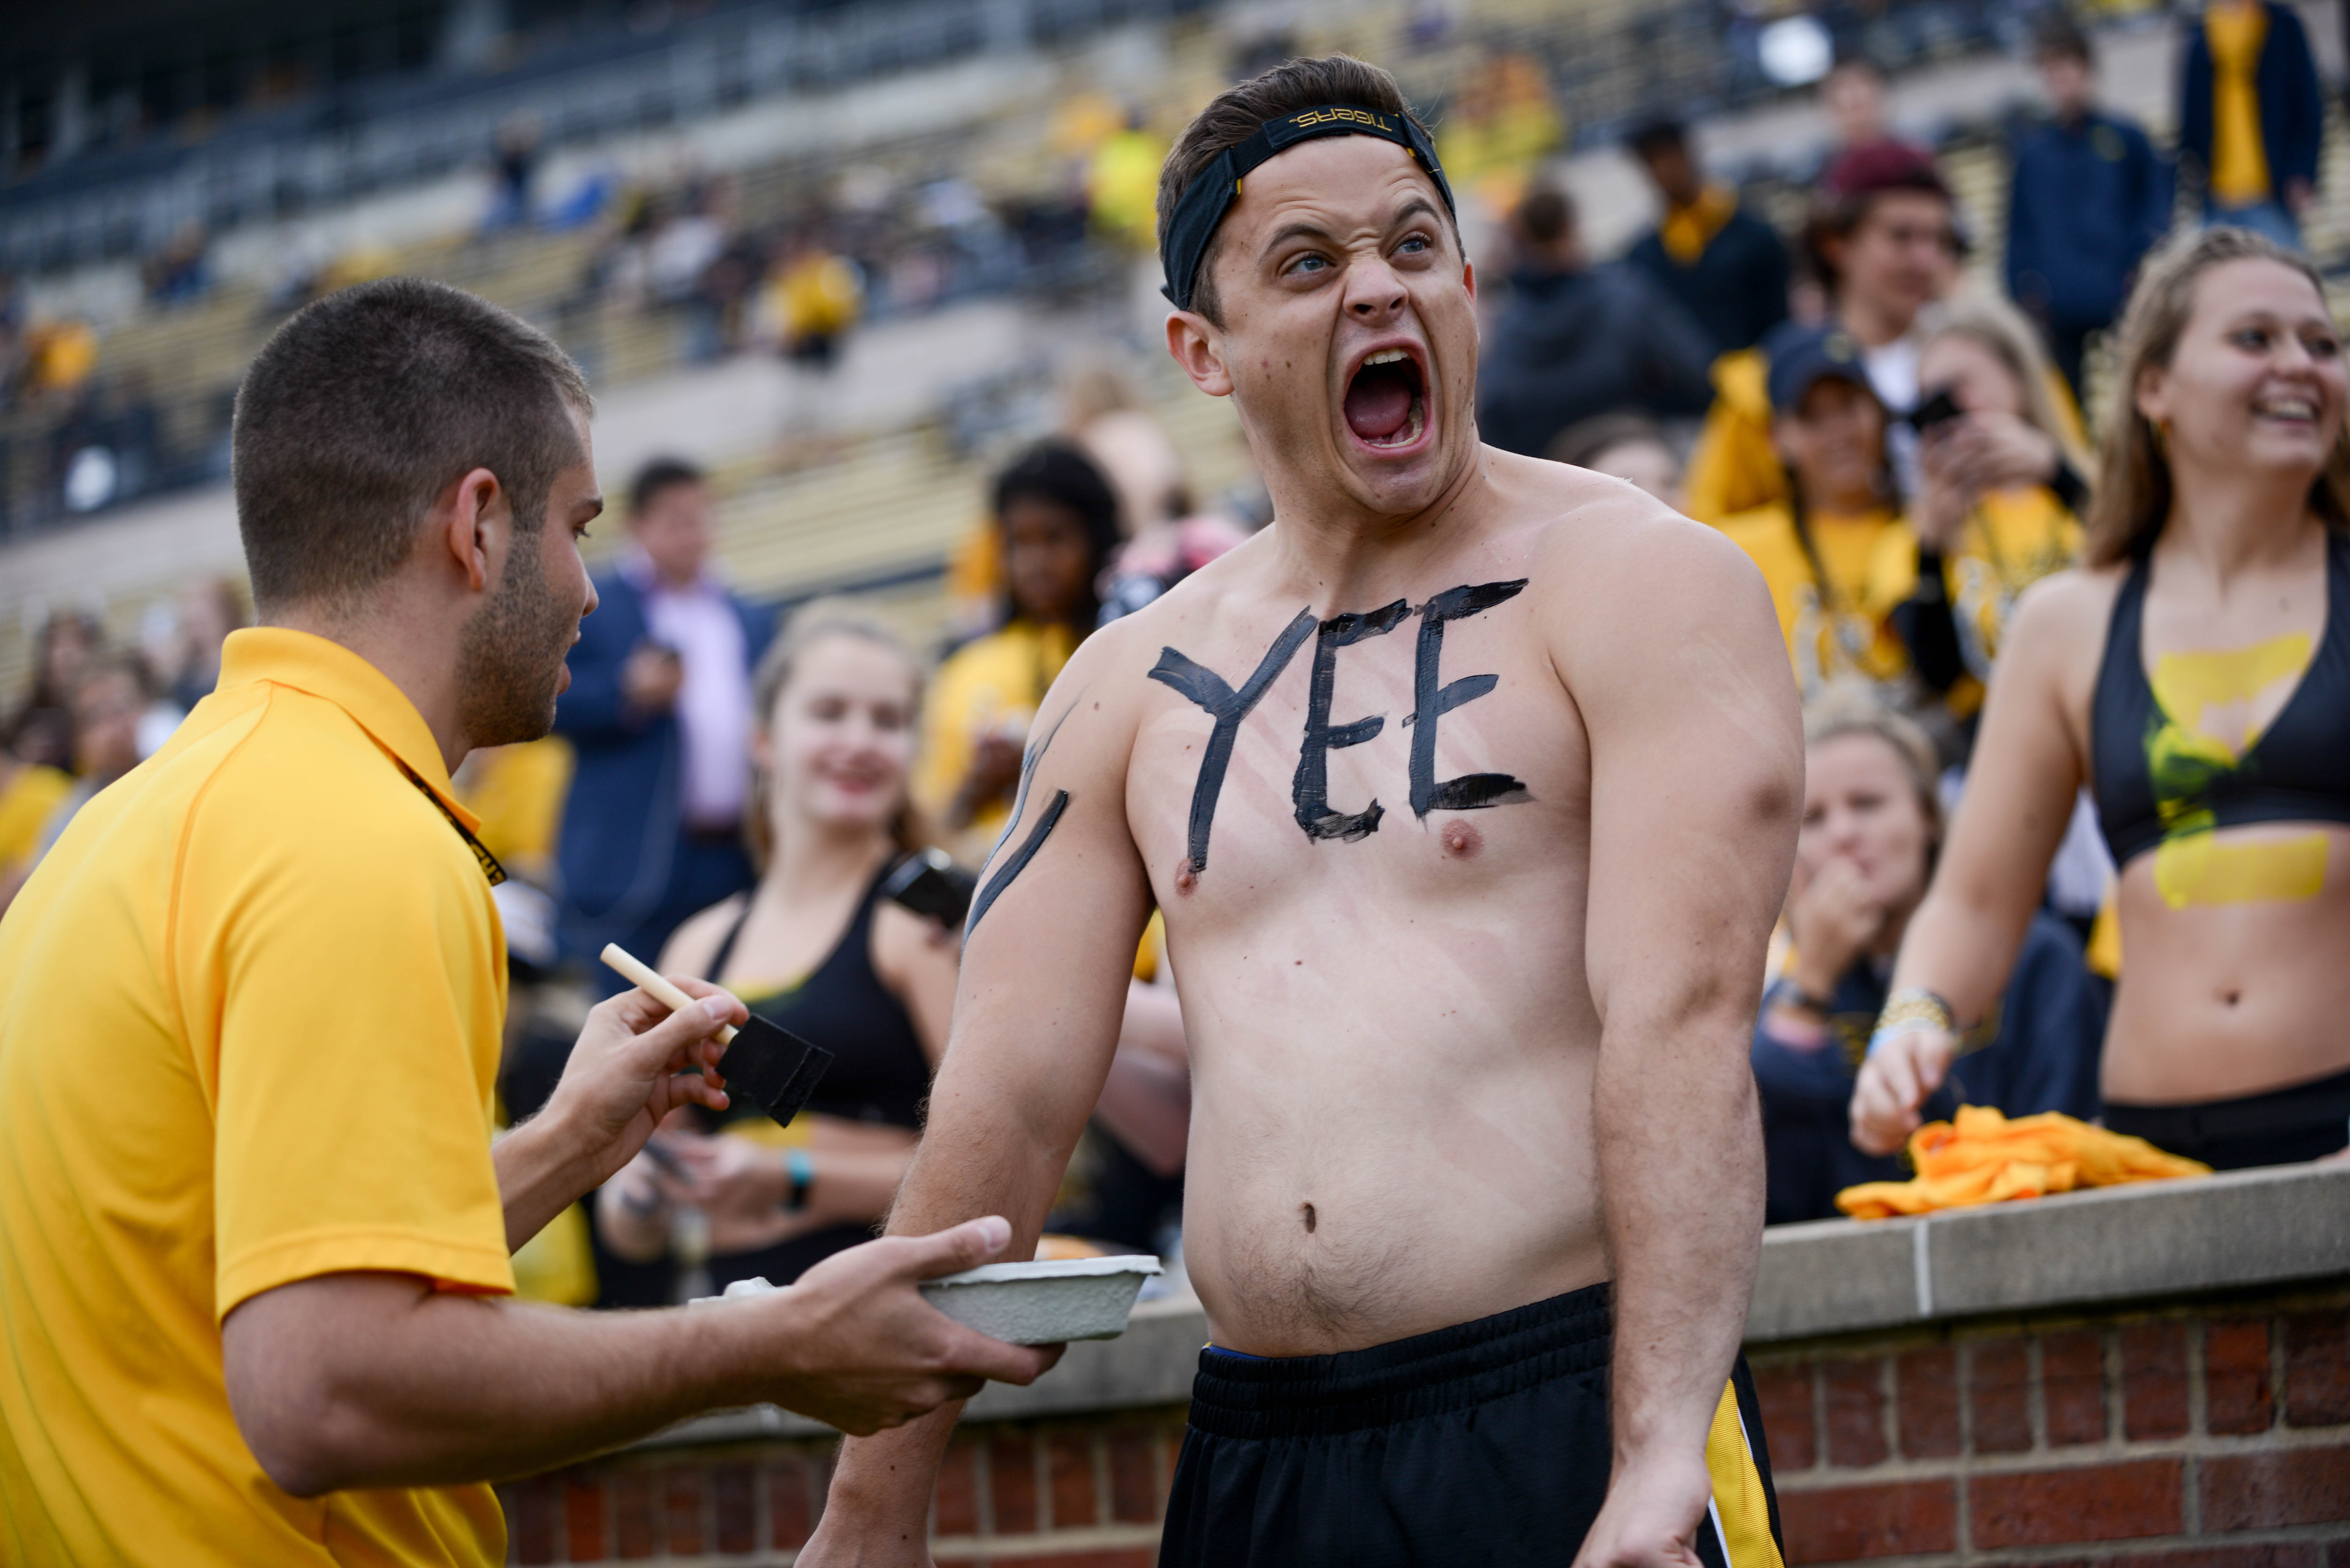 A Mizzou fan stands with his shirt off as his body painted with lettering.